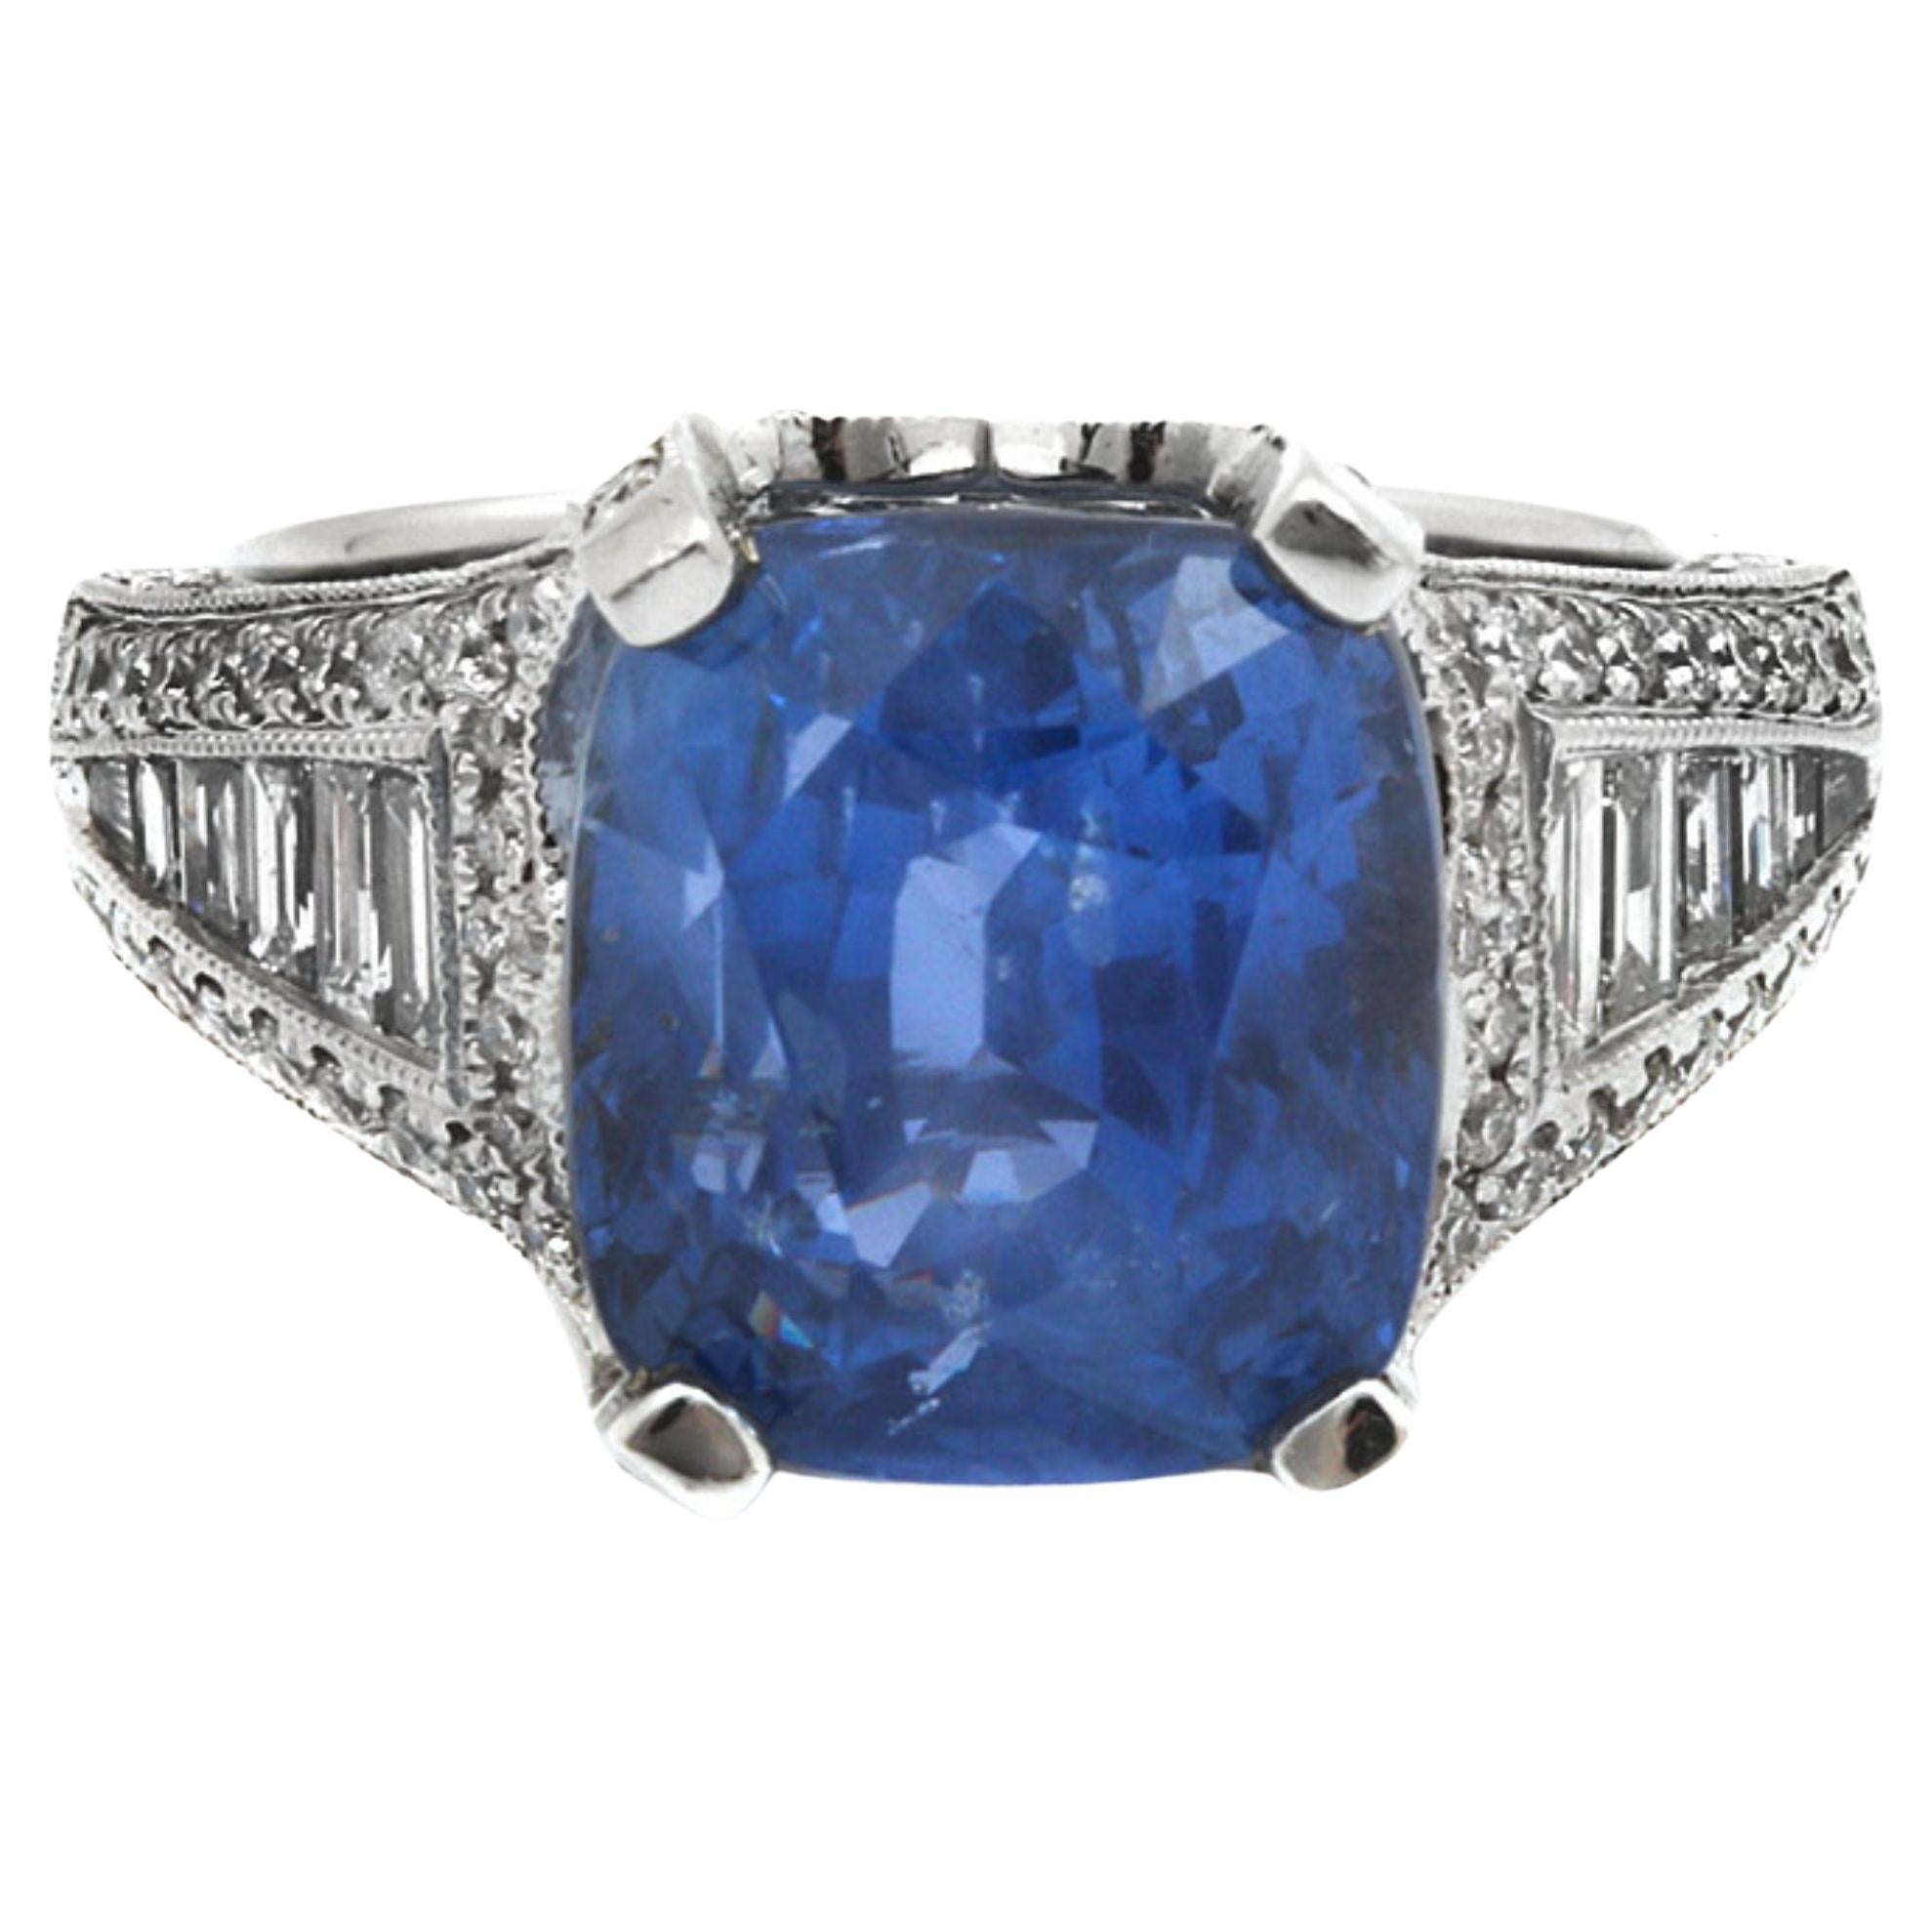 For Sale:  7 Carat Natural Sapphire Diamond Engagement Ring Set in 18K Gold, Cocktail Ring